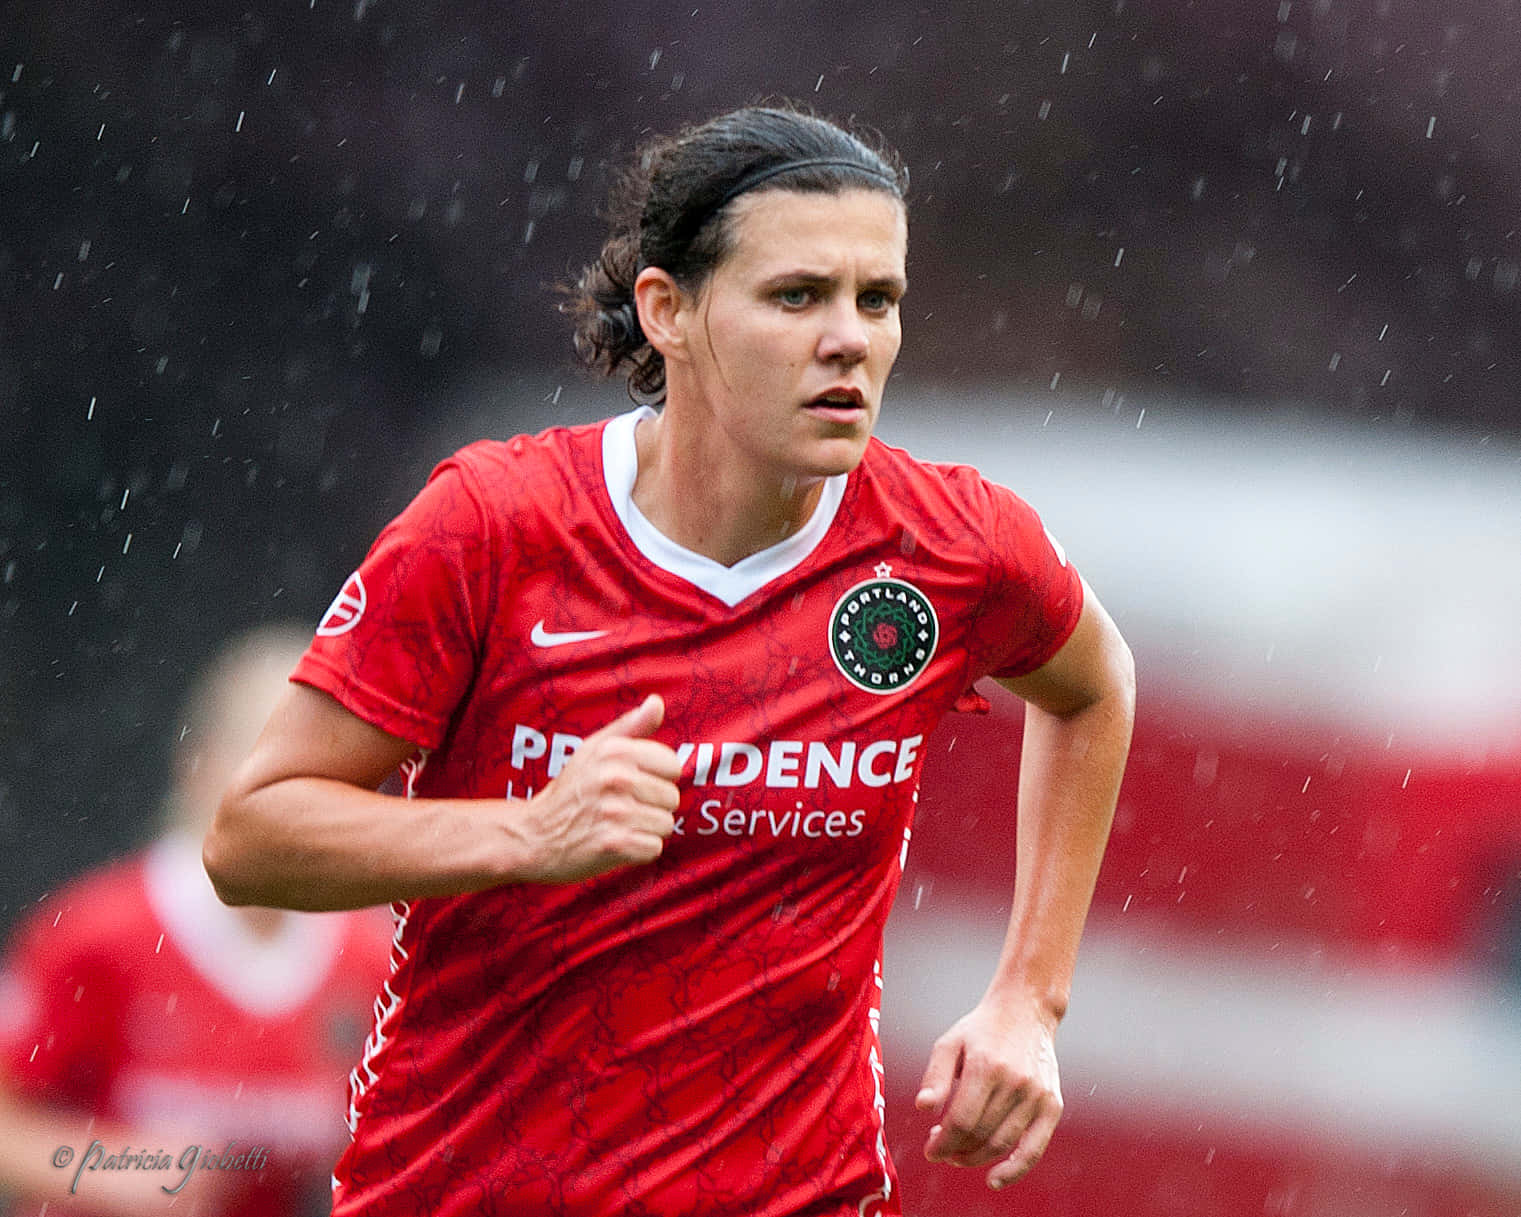 Action-packed Game On The Field - Portland Thorns Fc Wallpaper